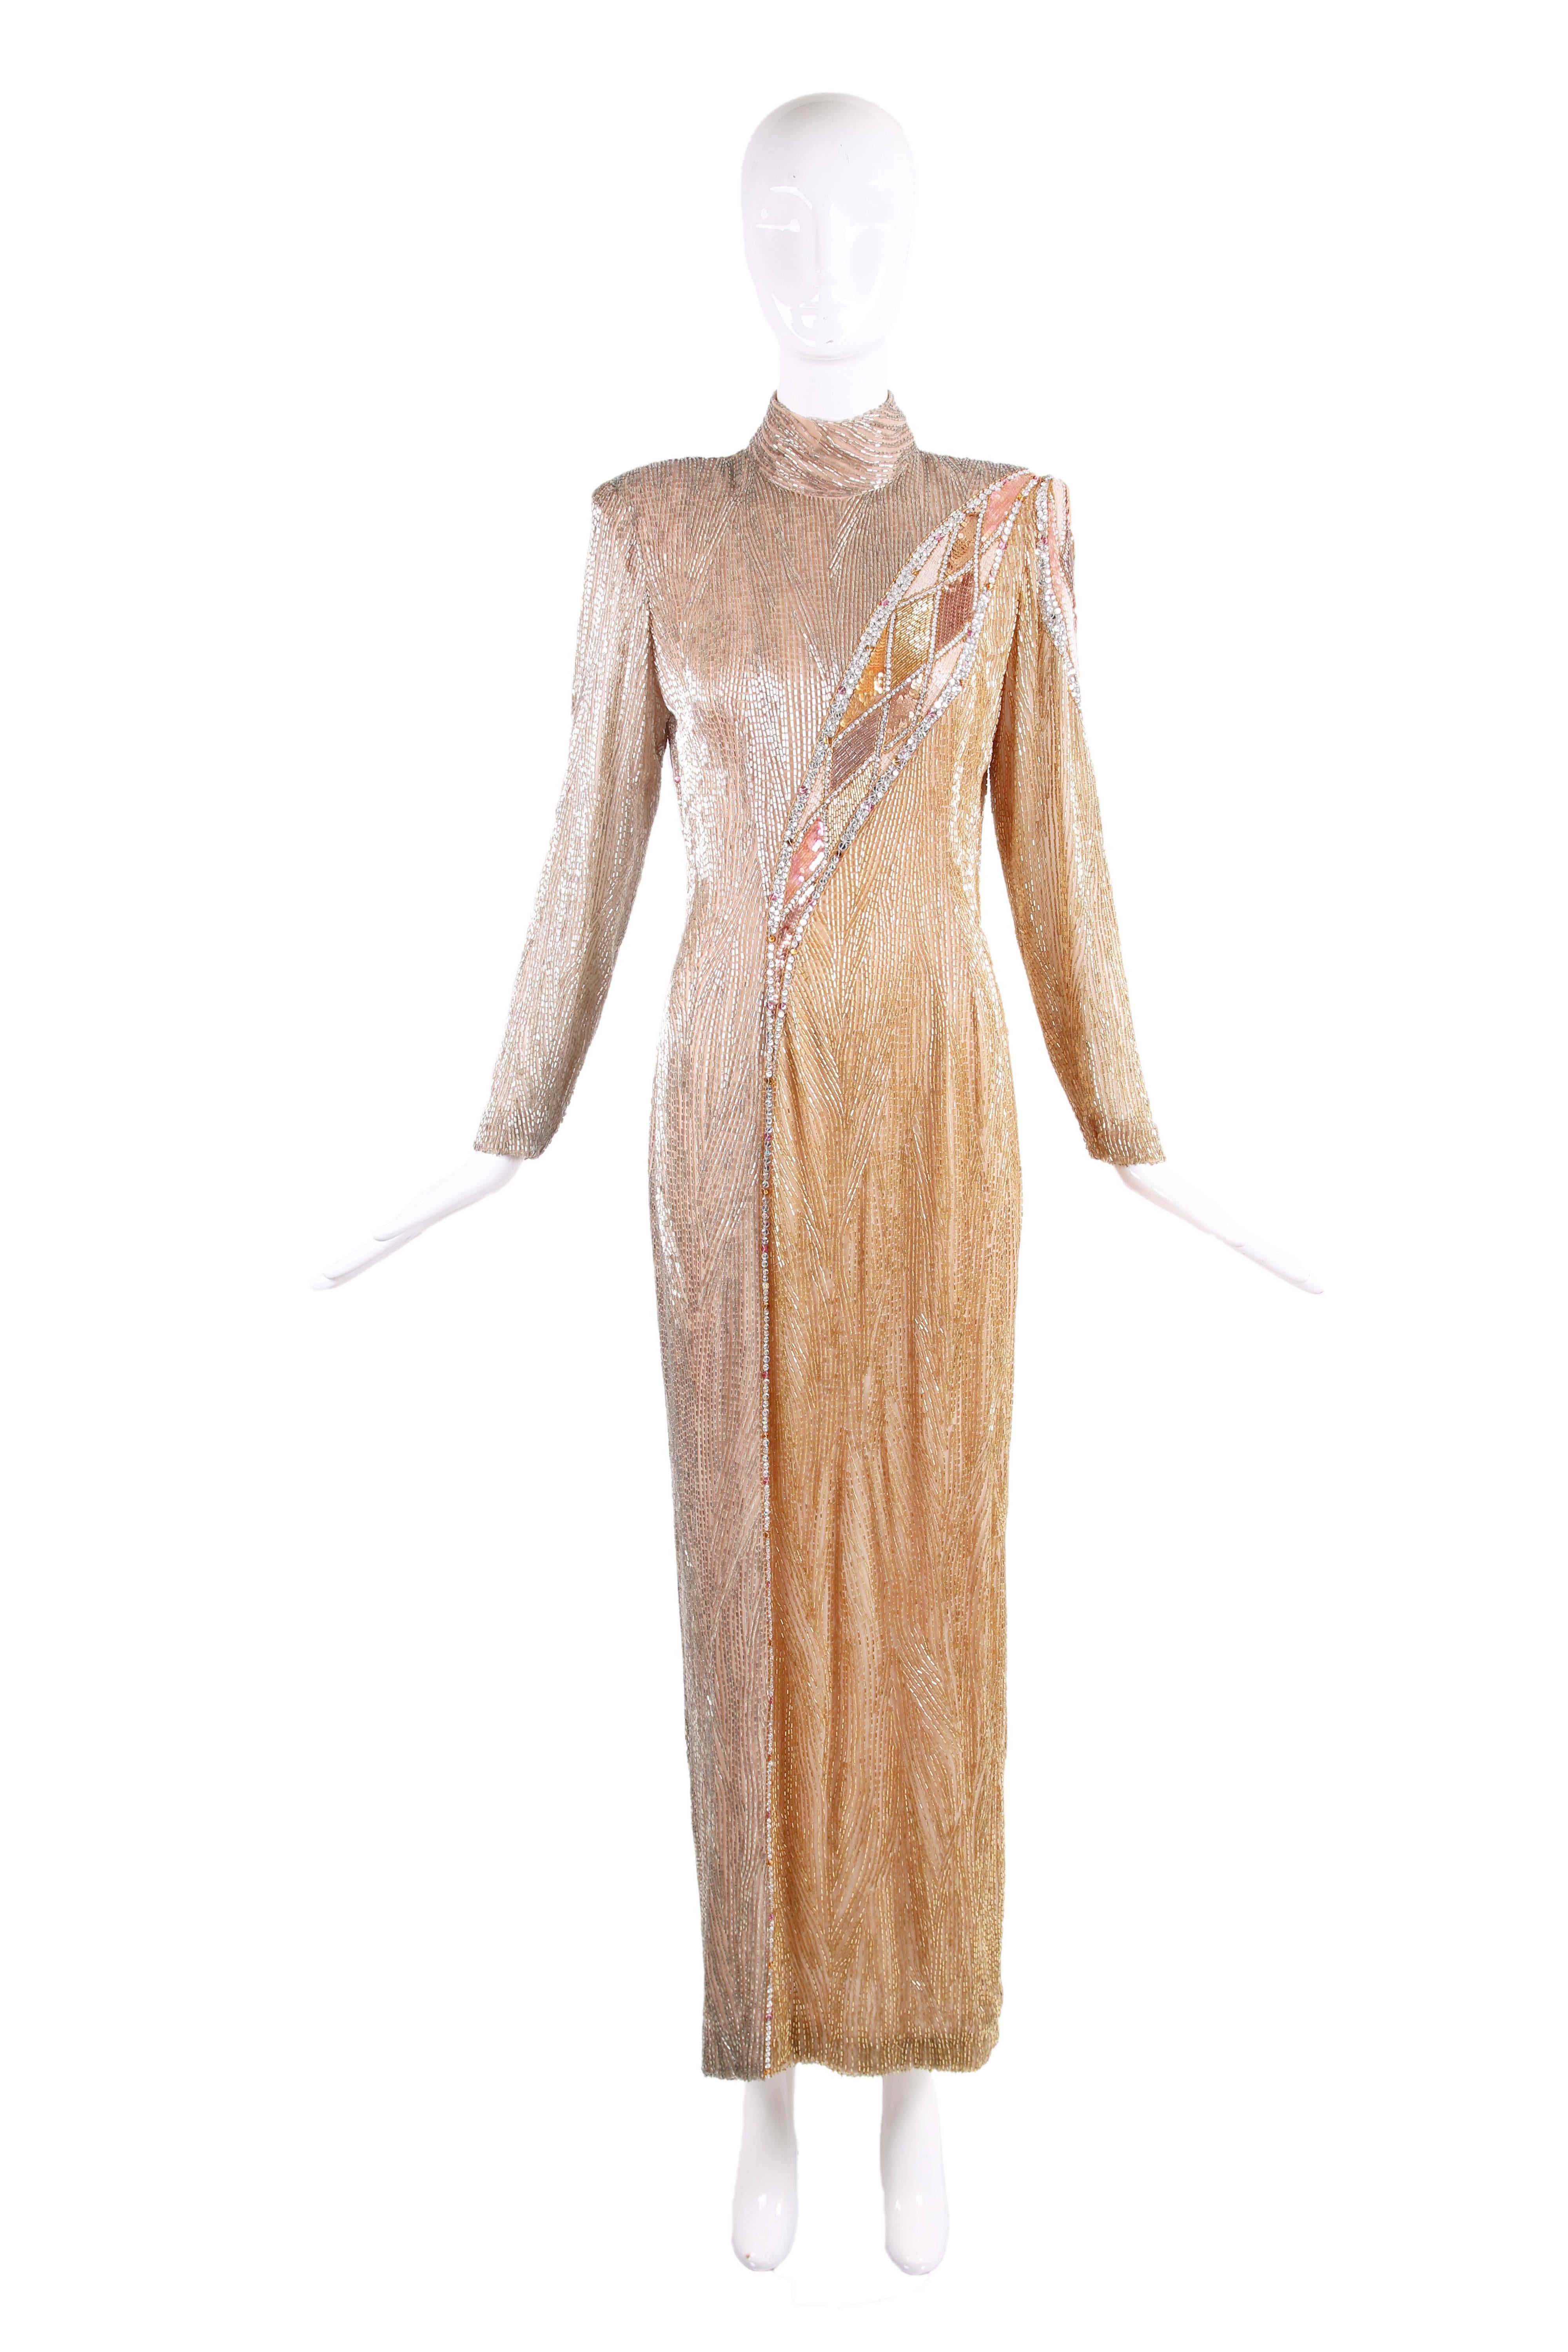 Vintage Bob Mackie champagne-colored all over beaded and sequined evening gown with deco design. IN excellent condition - size tag 8 but fits more like a 6 so please consult measurements.
MEASUREMENTS:
Shoulders - 15